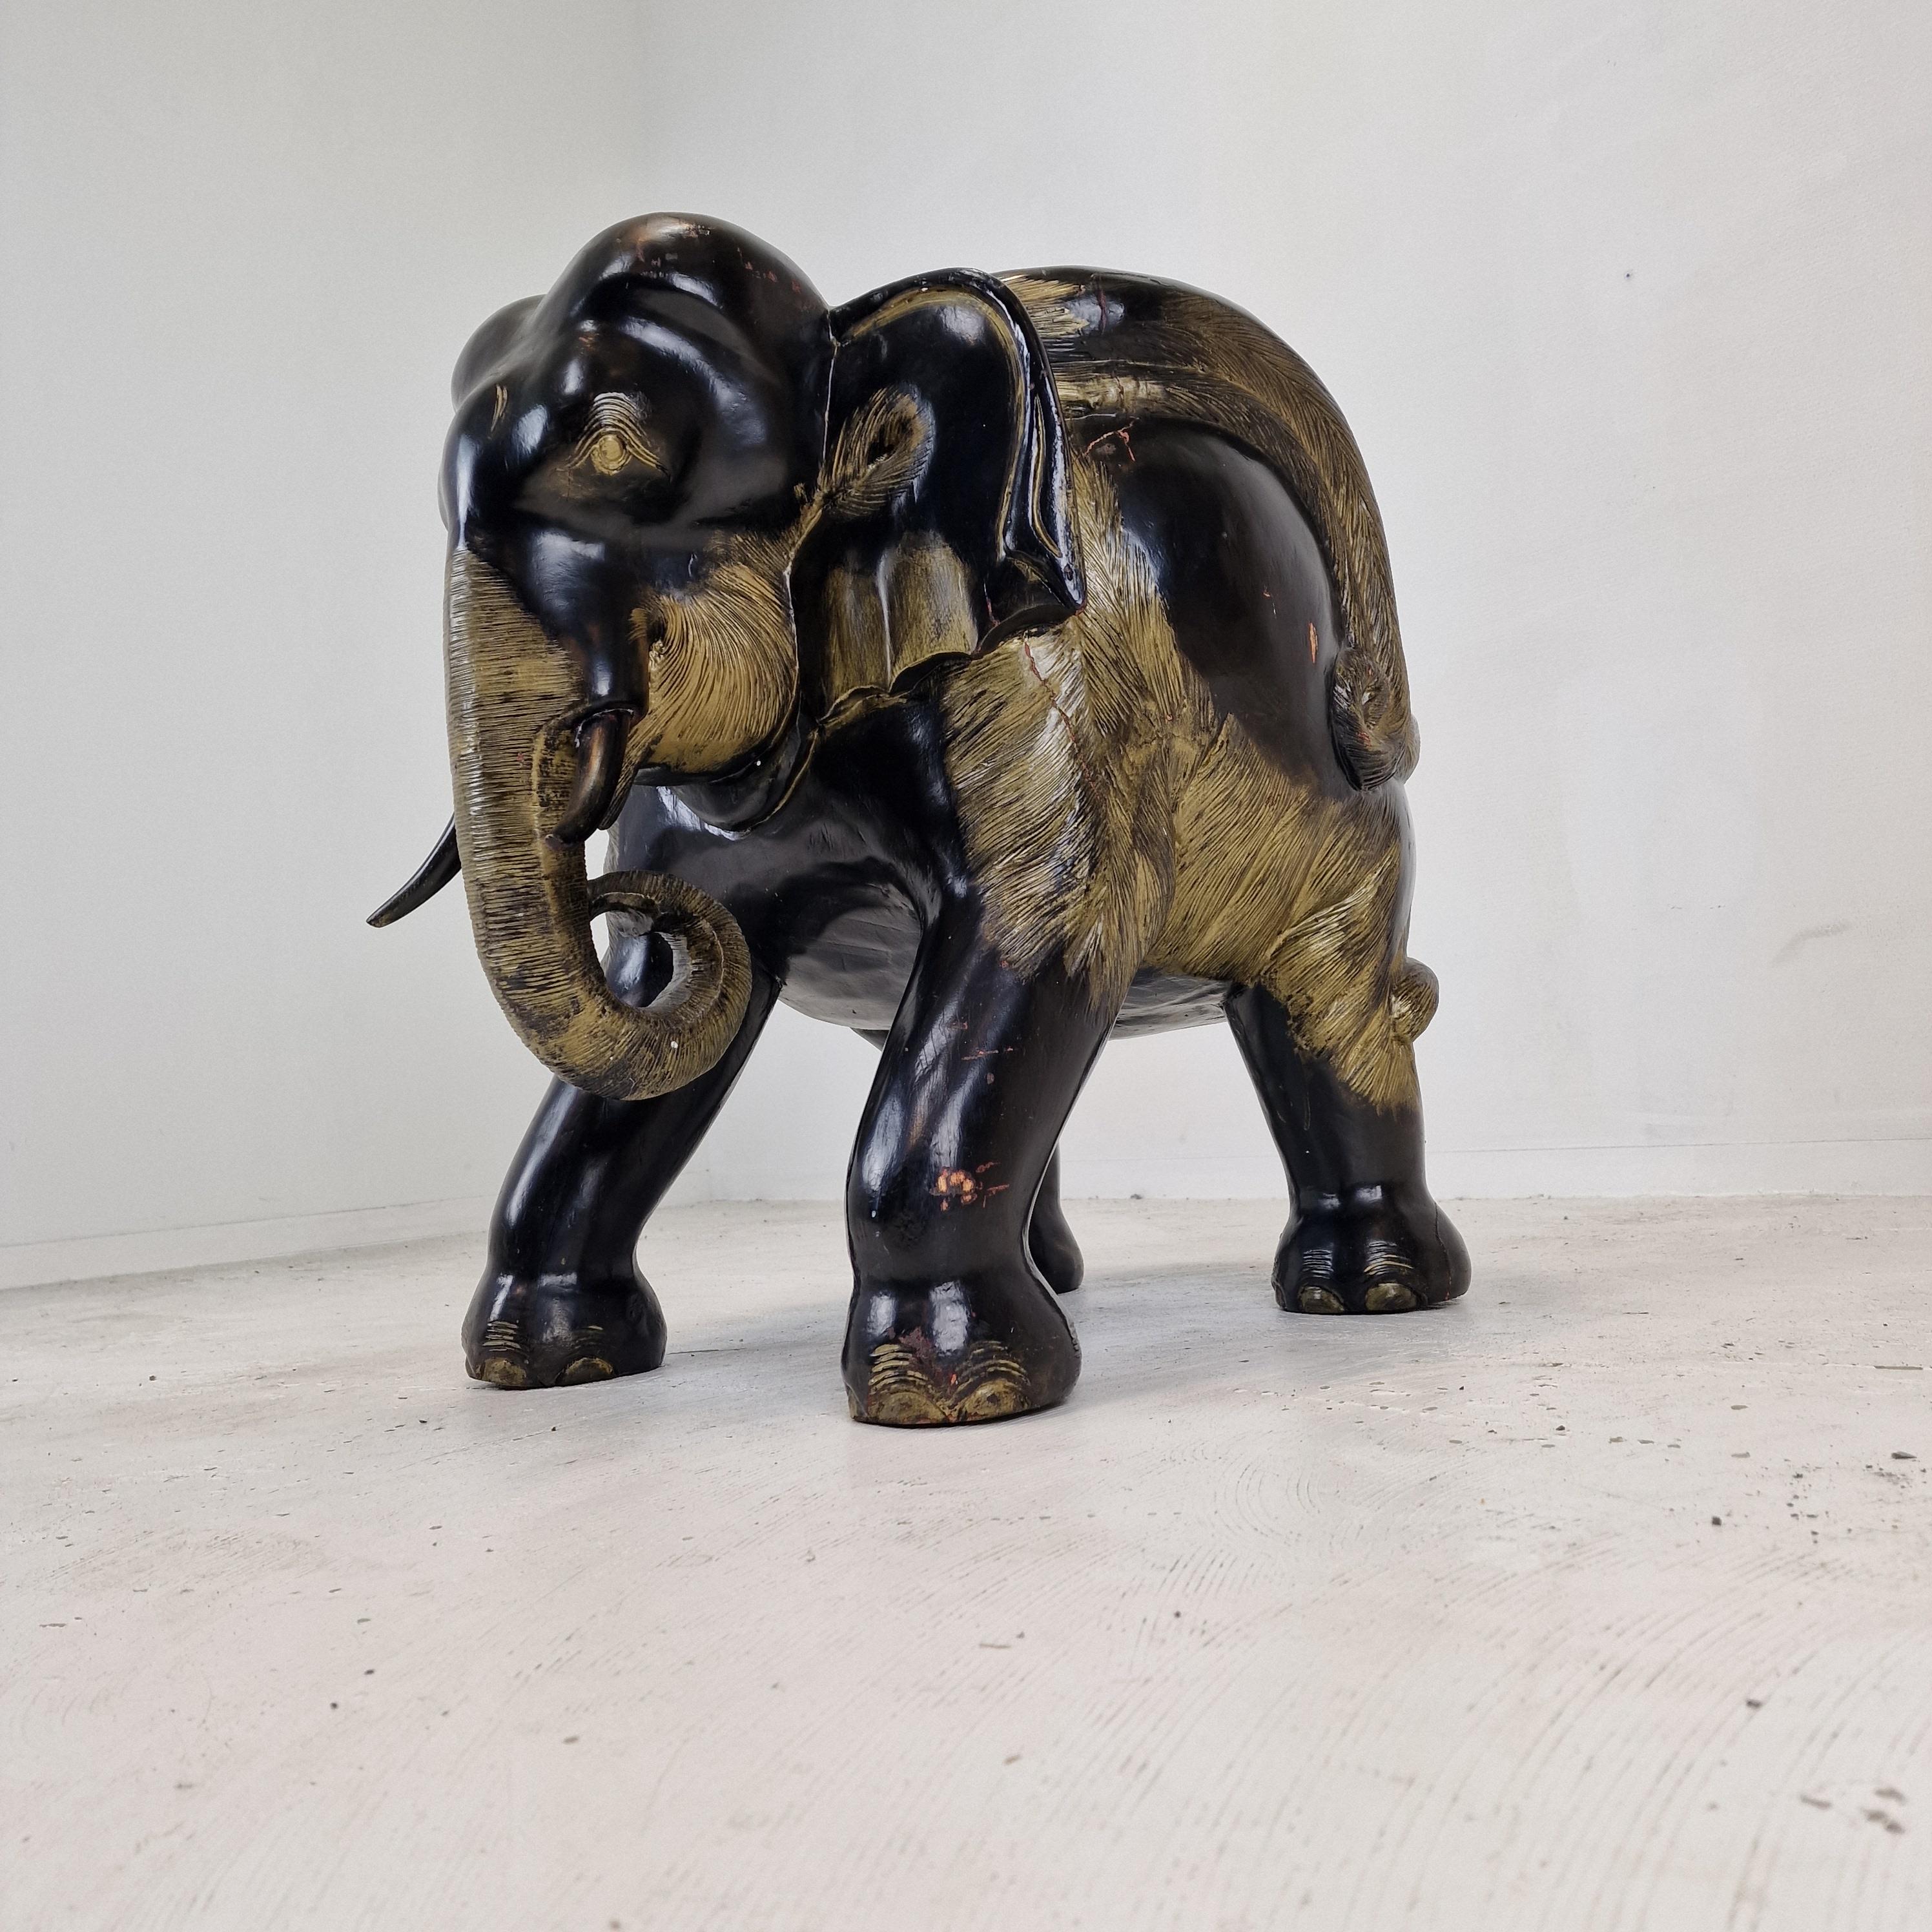 Stunning Indonesian elephant chair, fabricated in the early 19th century.

This amazing chair is fabricated of wood.
It has the original black and golden paint.

Please take notice of the nice details.

It has traces of use, as you can see on the